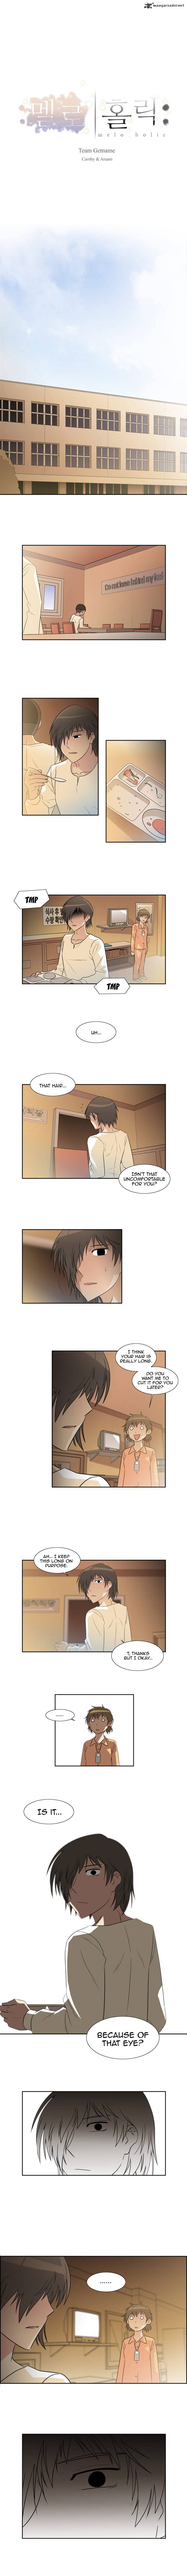 Melo Holic Chapter 52 Page 1